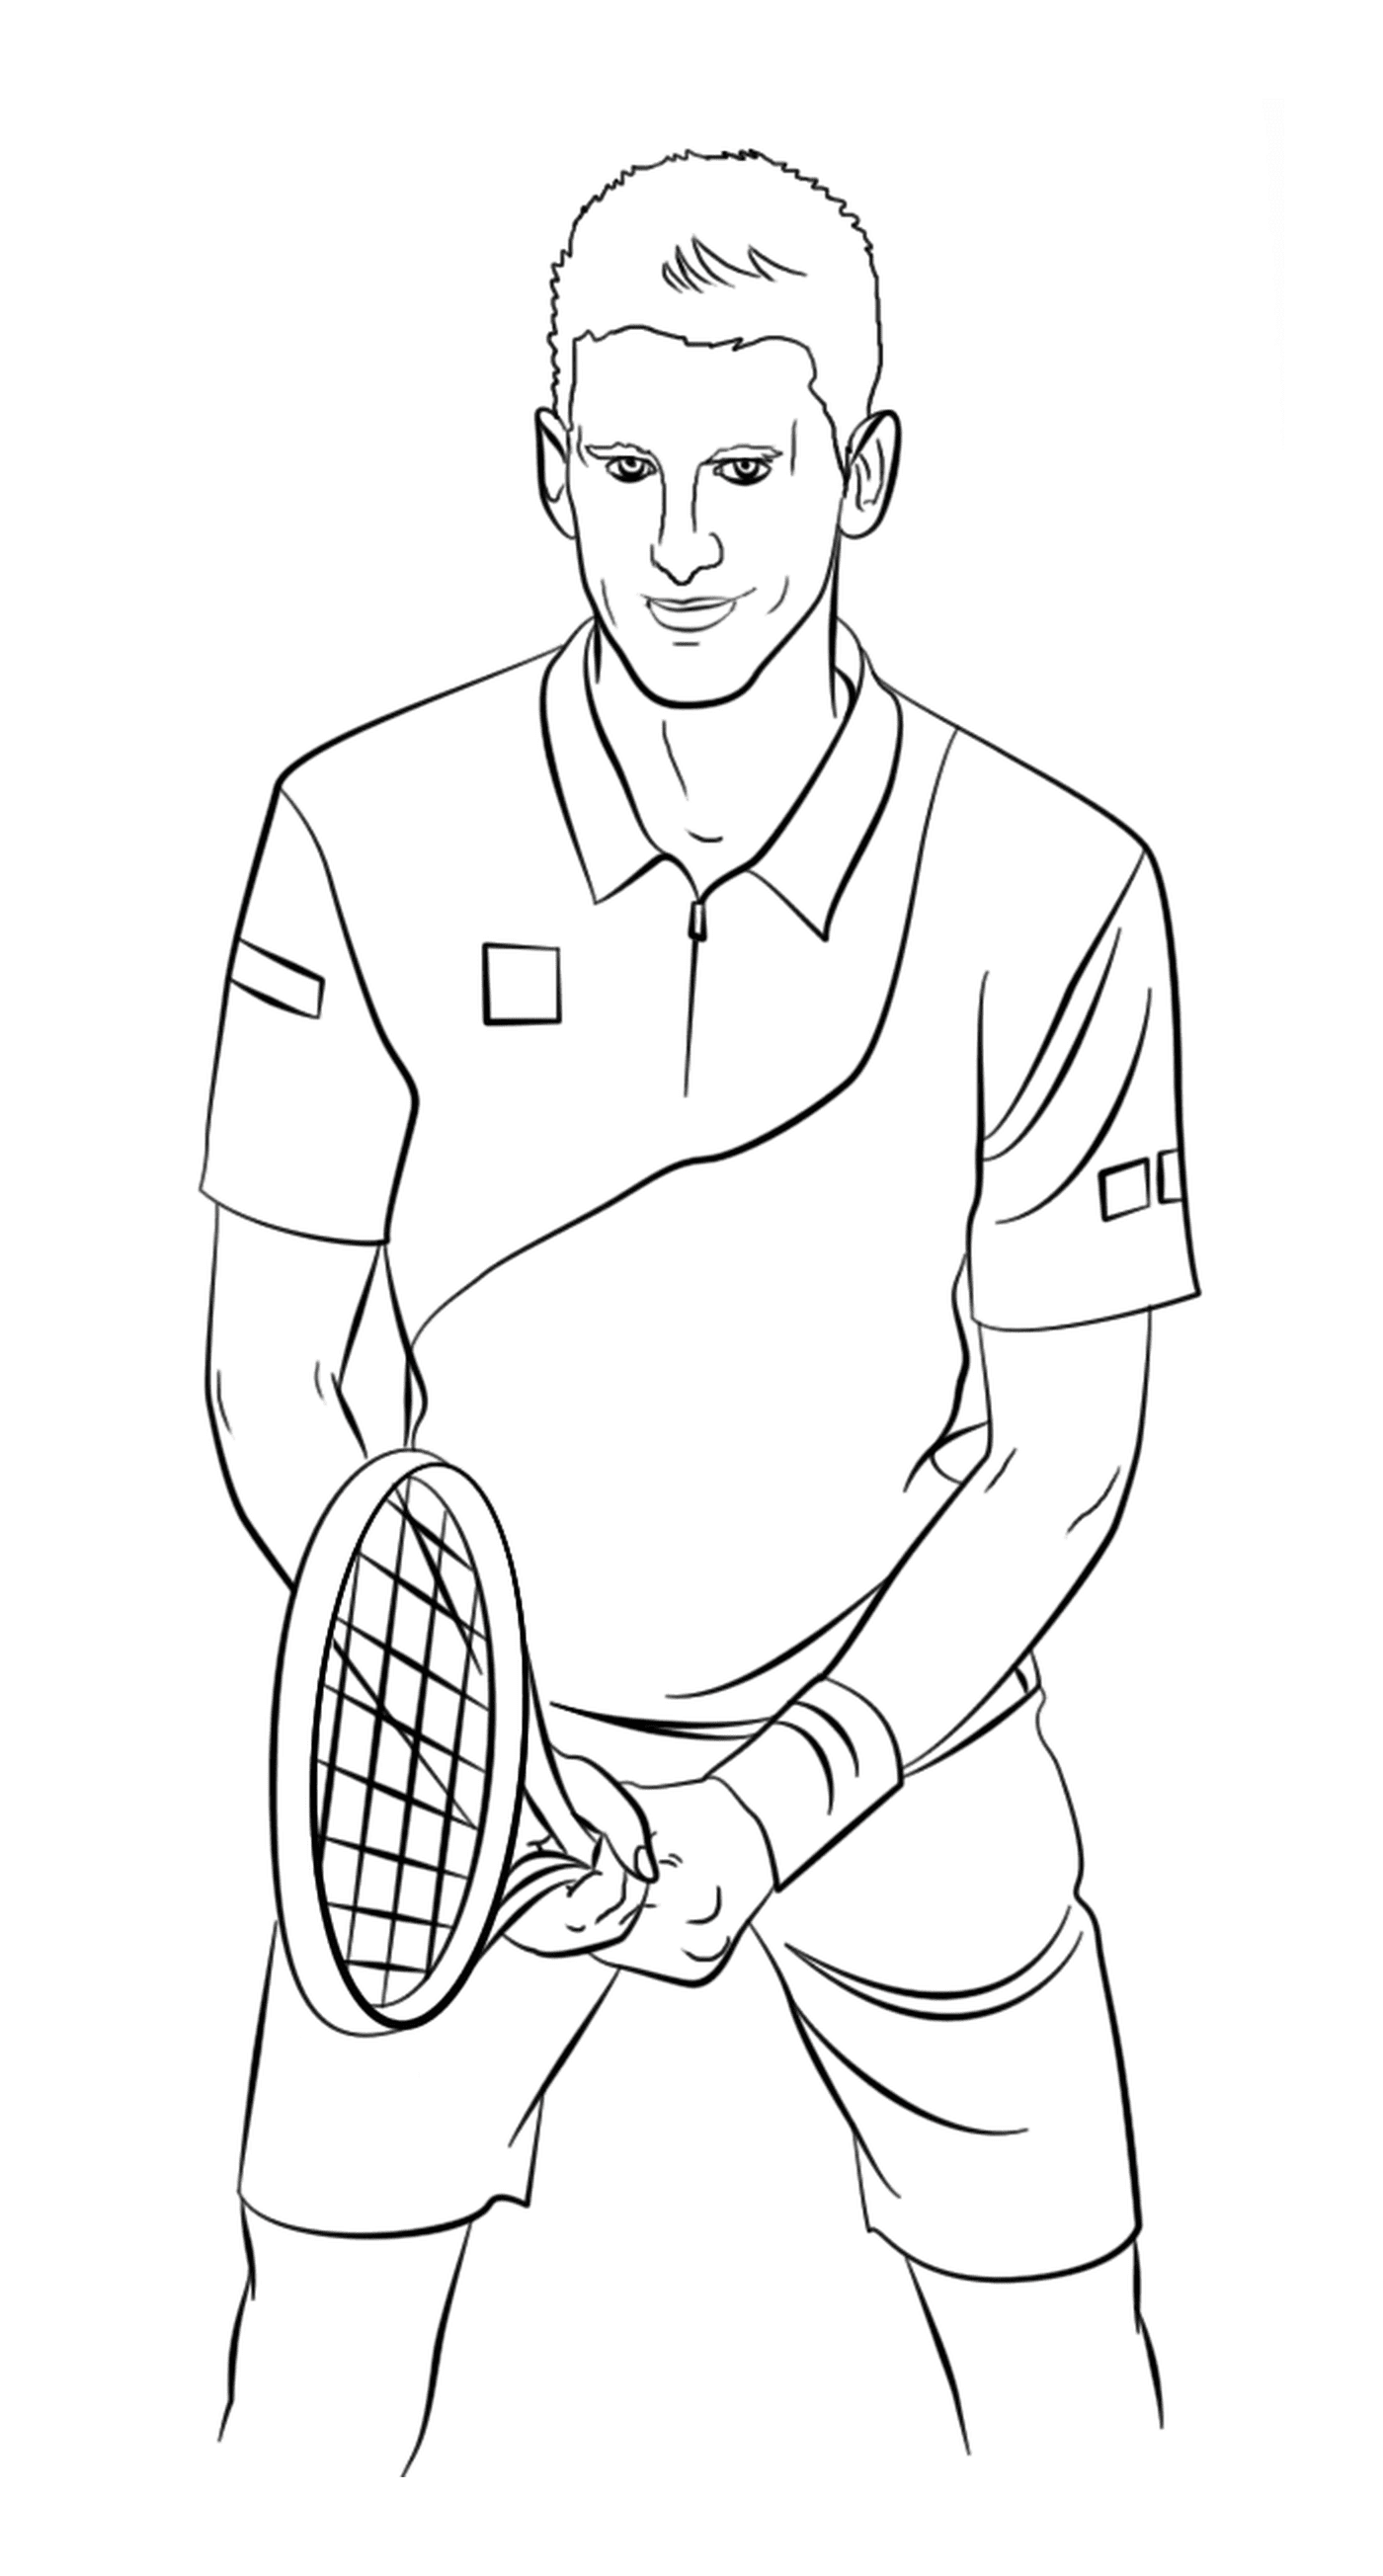  A professional tennis player 